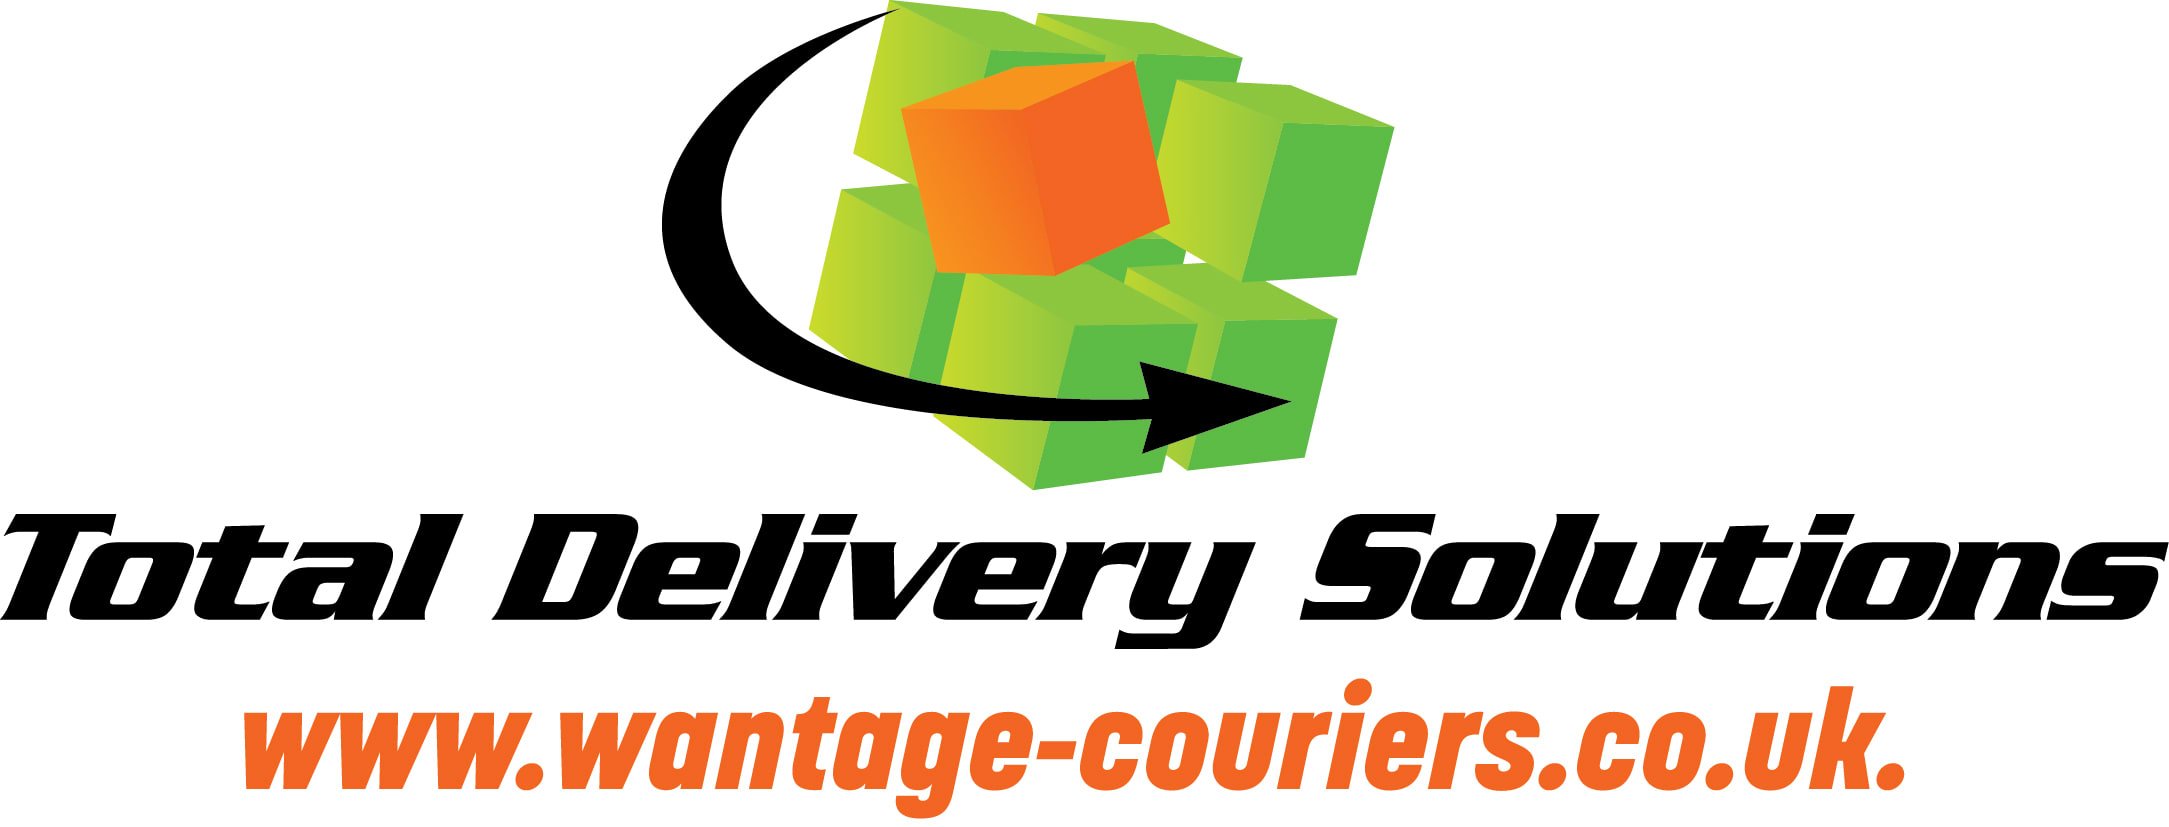 Wantage Couriers 24/7 Couriers